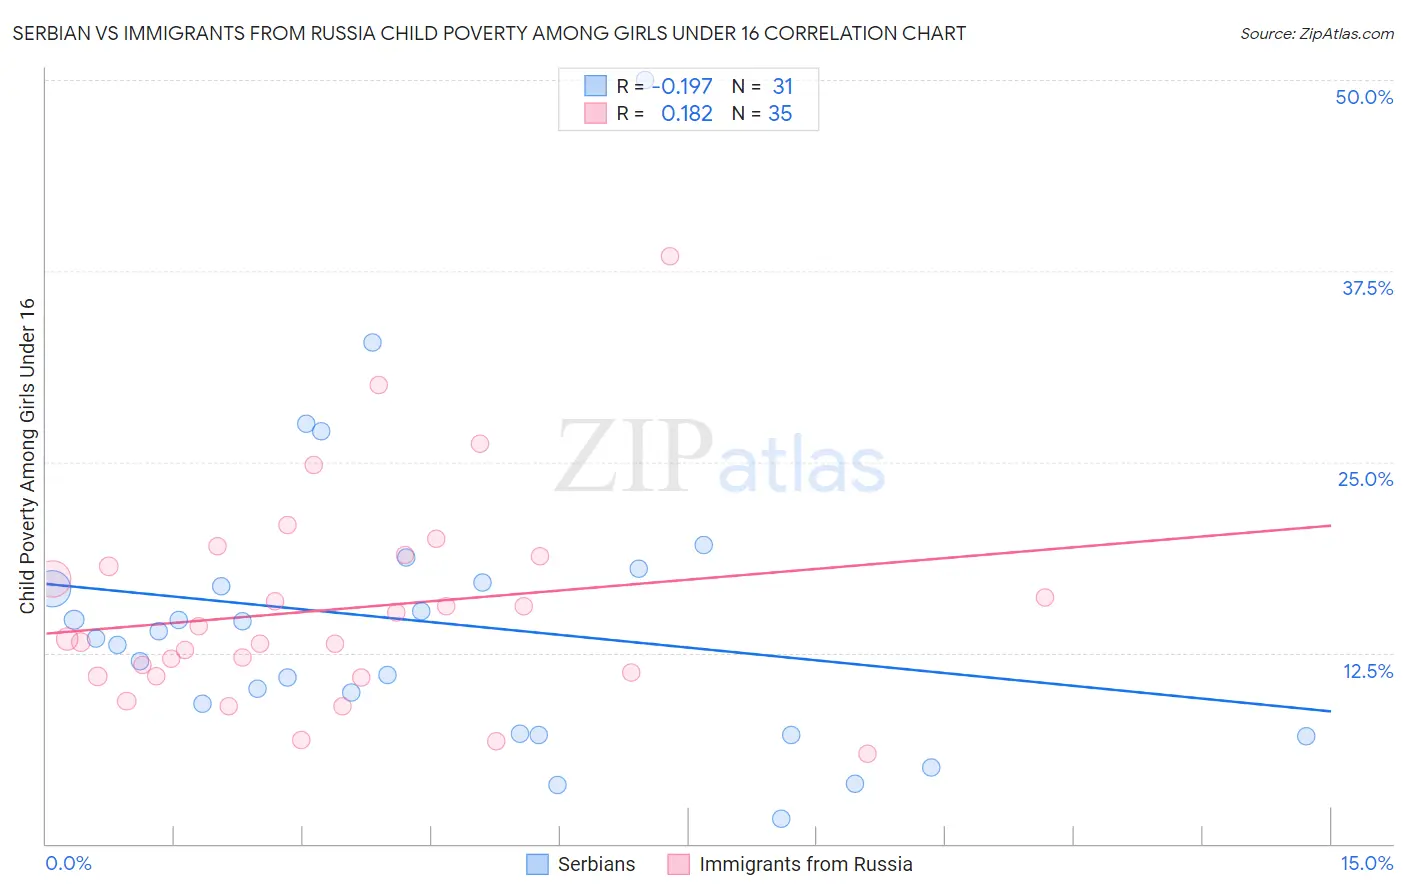 Serbian vs Immigrants from Russia Child Poverty Among Girls Under 16